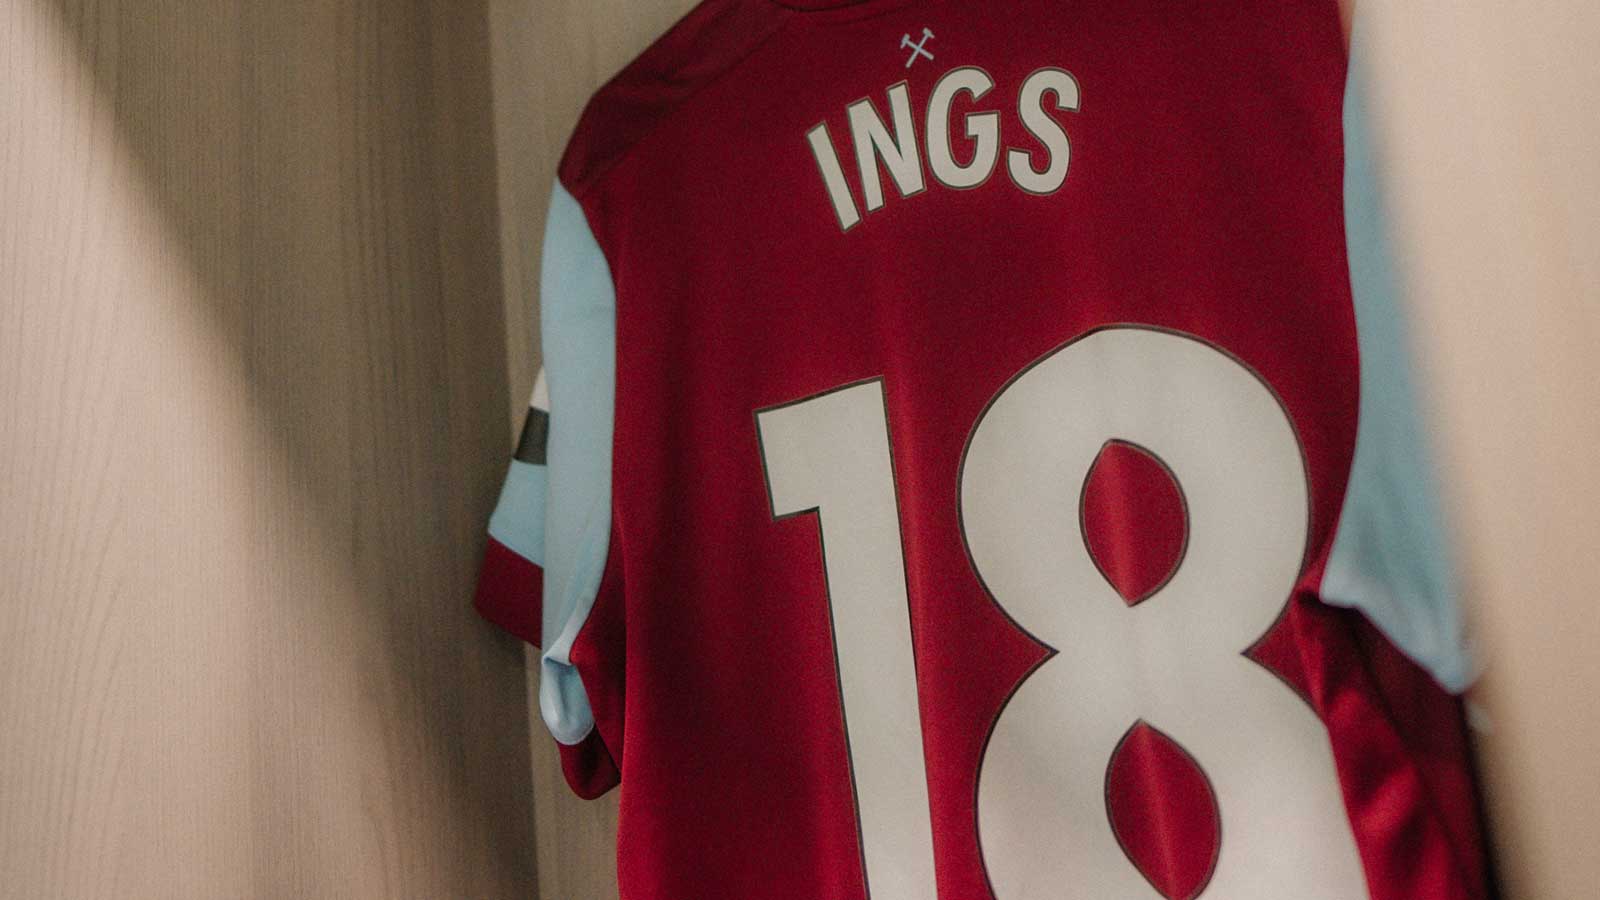 Danny Ings' shirt in the dressing room